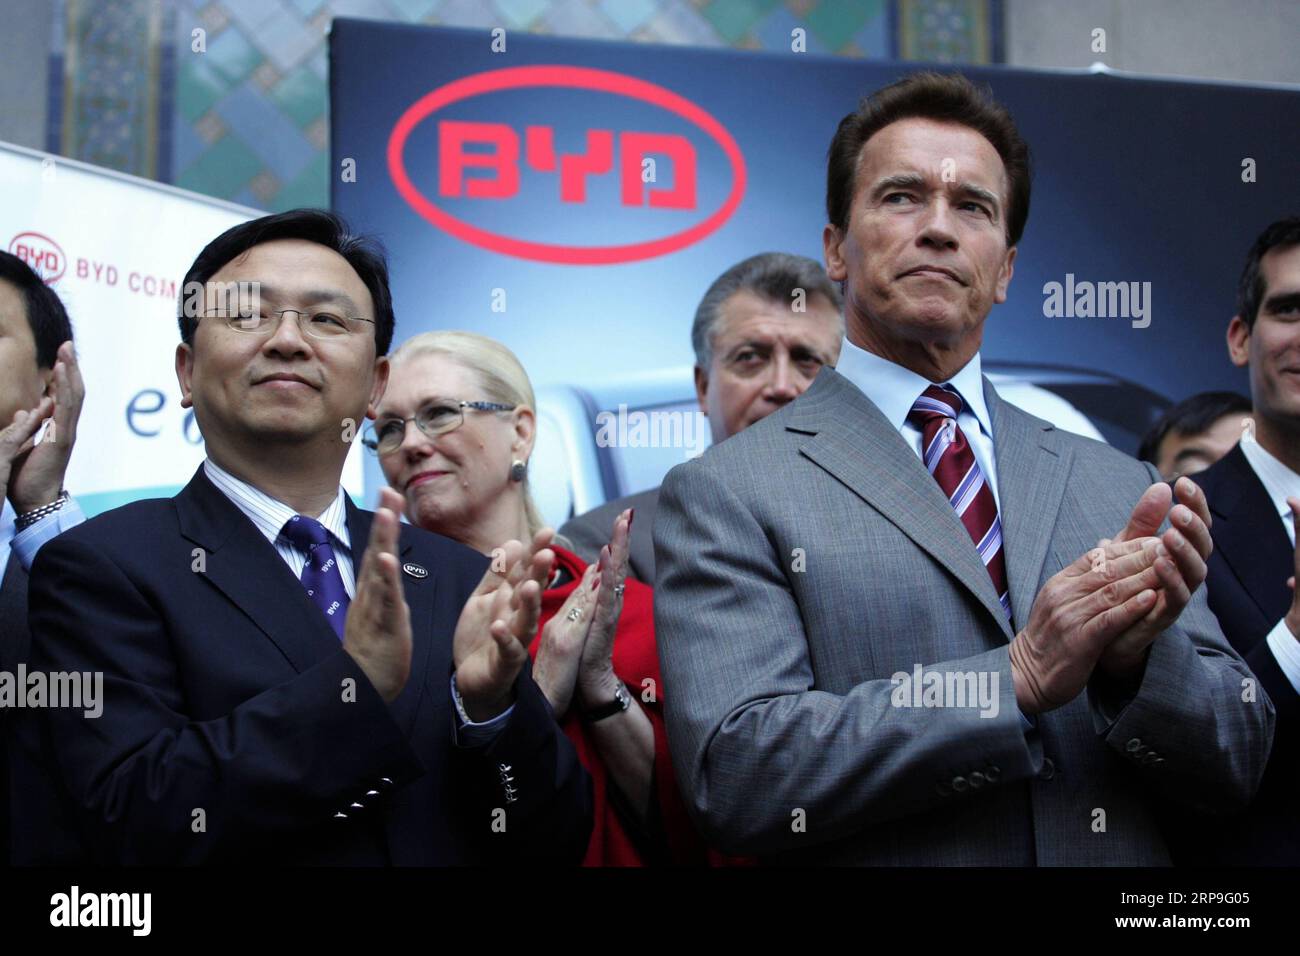 (190406) -- BEIJING, April 6, 2019 -- File photo taken on April 30, 2010 shows Chinese automaker BYD Chairman Wang Chuanfu (L) and then California Governor Arnold Schwarzenegger (R) during a press conference at Los Angeles City Hall to announce that BYD will locate its North American headquarters in Los Angeles, the United States. China s leading electric vehicle maker BYD held a ceremony on April 3, 2019 to celebrate its 300th bus at its Lancaster manufacturing plant in the U.S. state of California, marking a milestone for production. ) XINHUA PHOTOS OF THE DAY RingoxH.W.xChiu PUBLICATIONxNOT Stock Photo